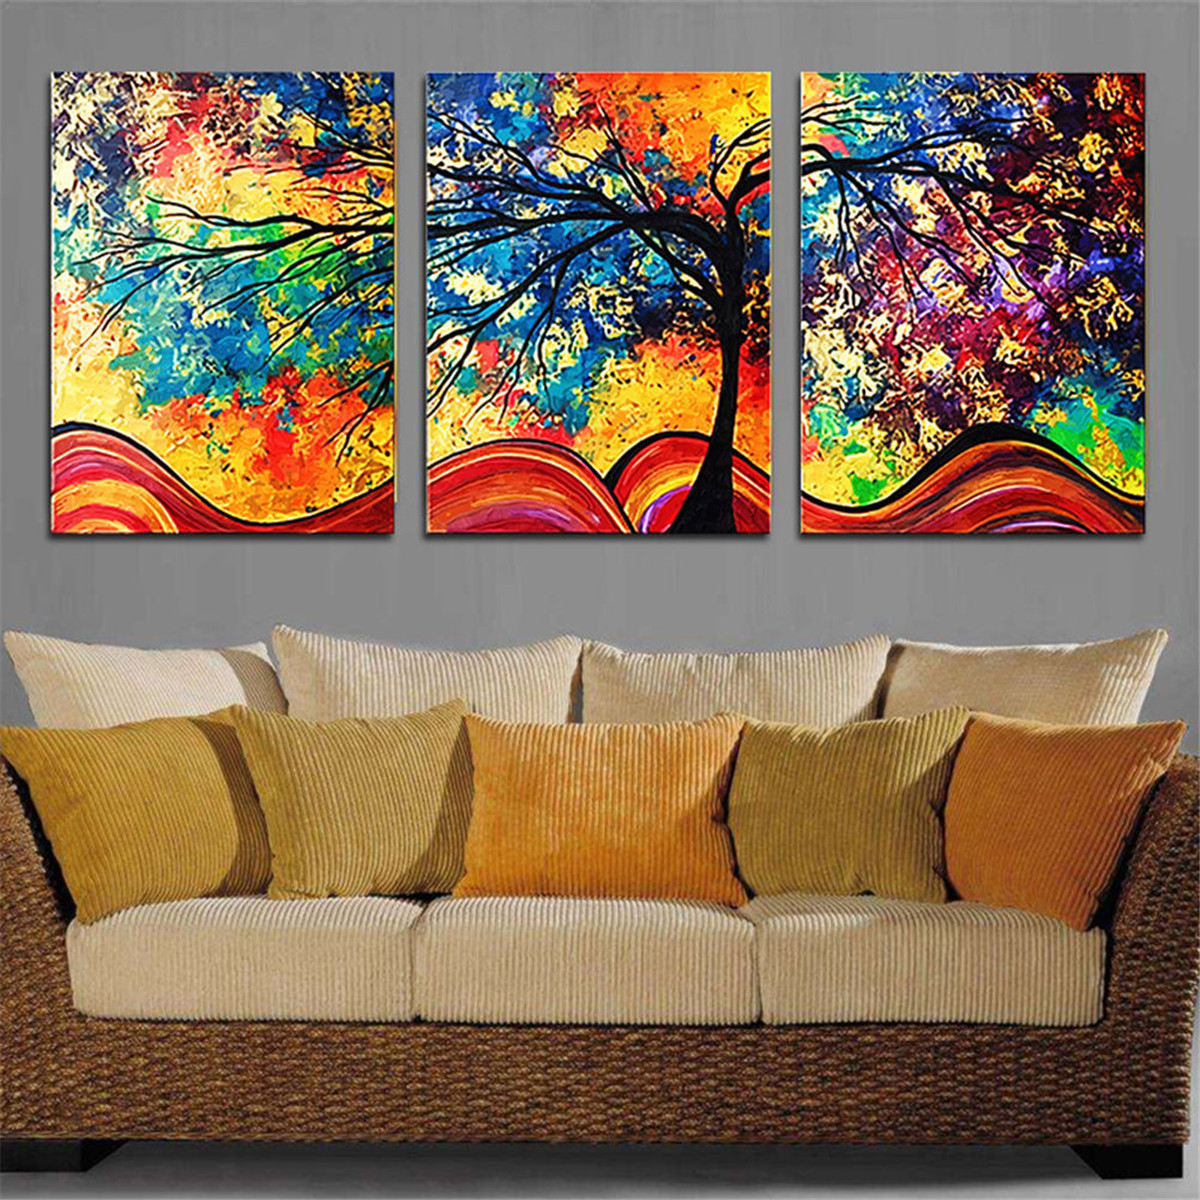 3Pcs-Colorful-Tree-HD-Canvas-Print-Paintings-Wall-Decorative-Print-Art-Pictures-FramedFrameless-Wall-1187263-10